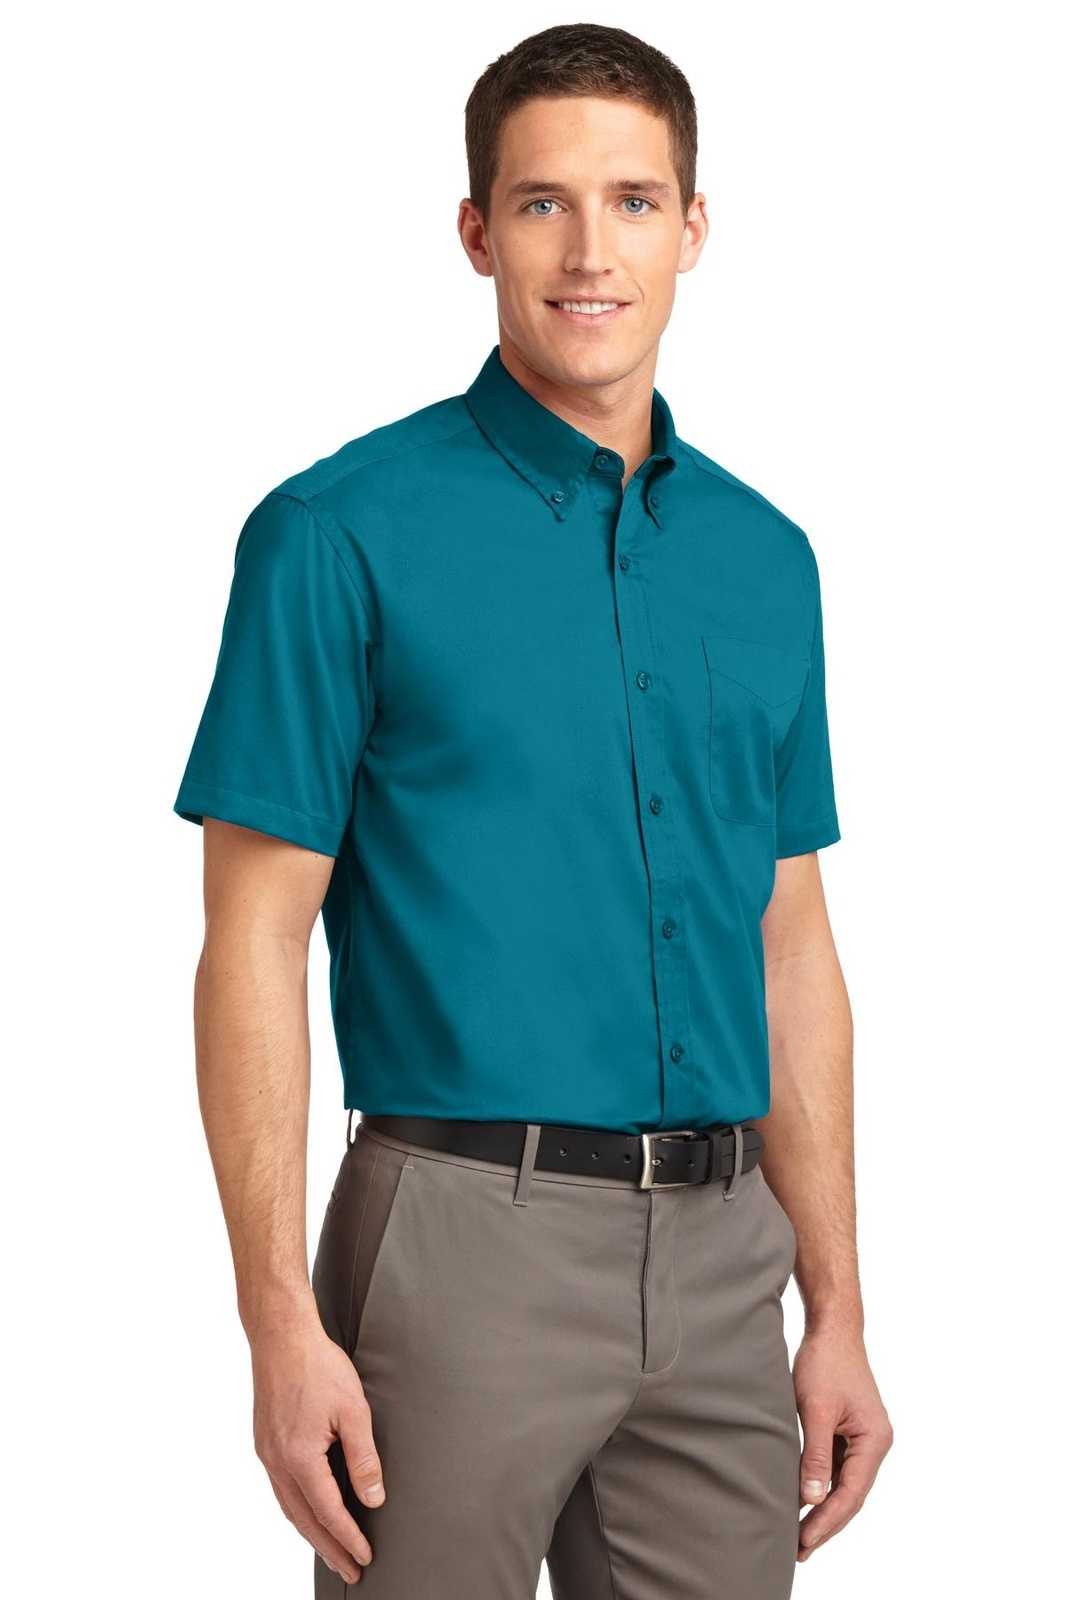 Port Authority S508 Short Sleeve Easy Care Shirt - Teal Green - HIT a Double - 4